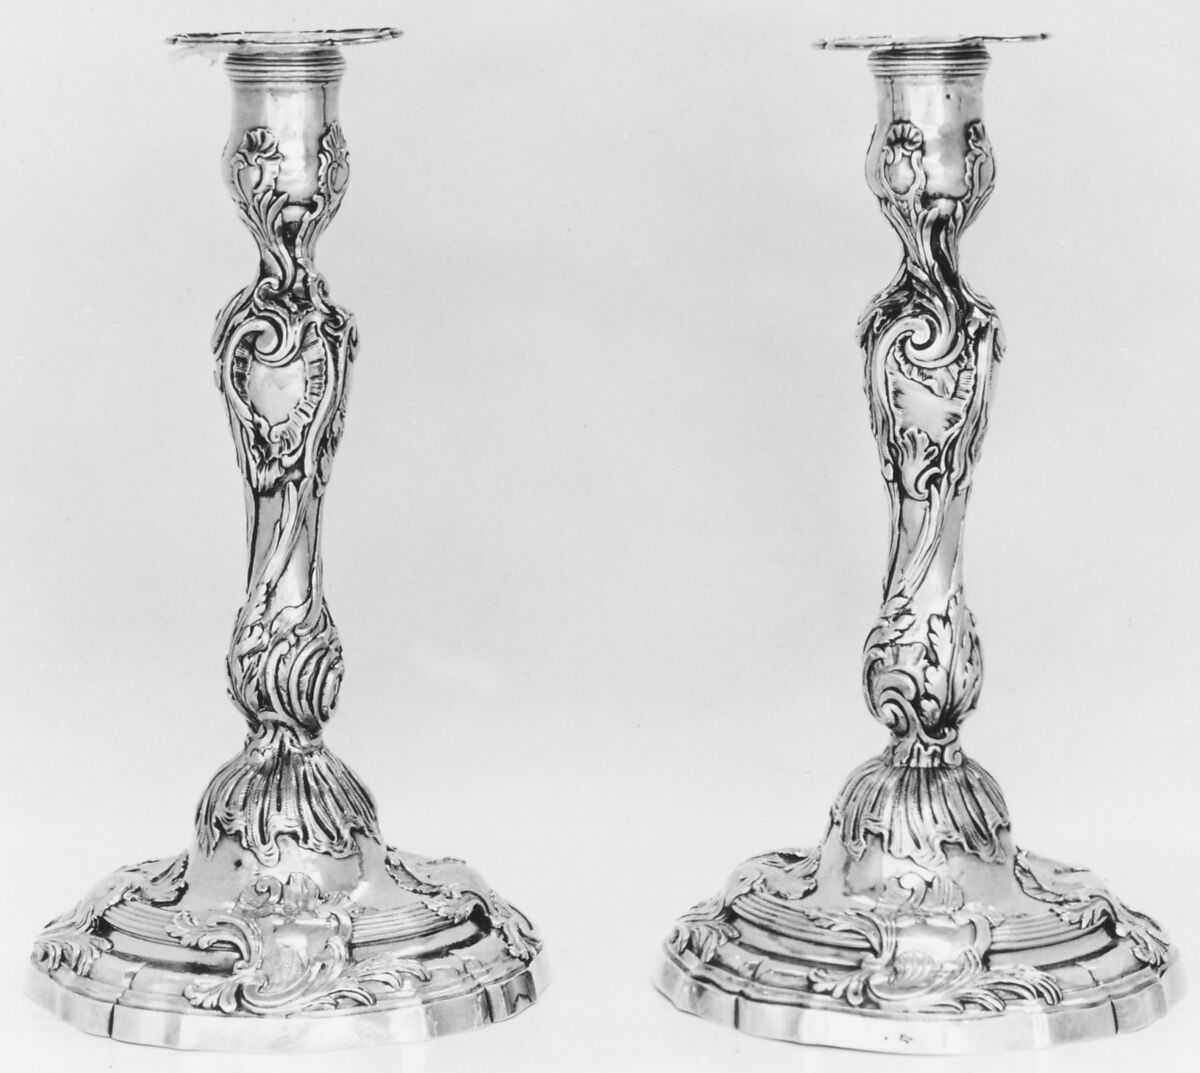 Candlestick (one of a pair), Candlestick made by Michel II Delapierre (master 1737, recorded 1785), Silver, French, Paris 